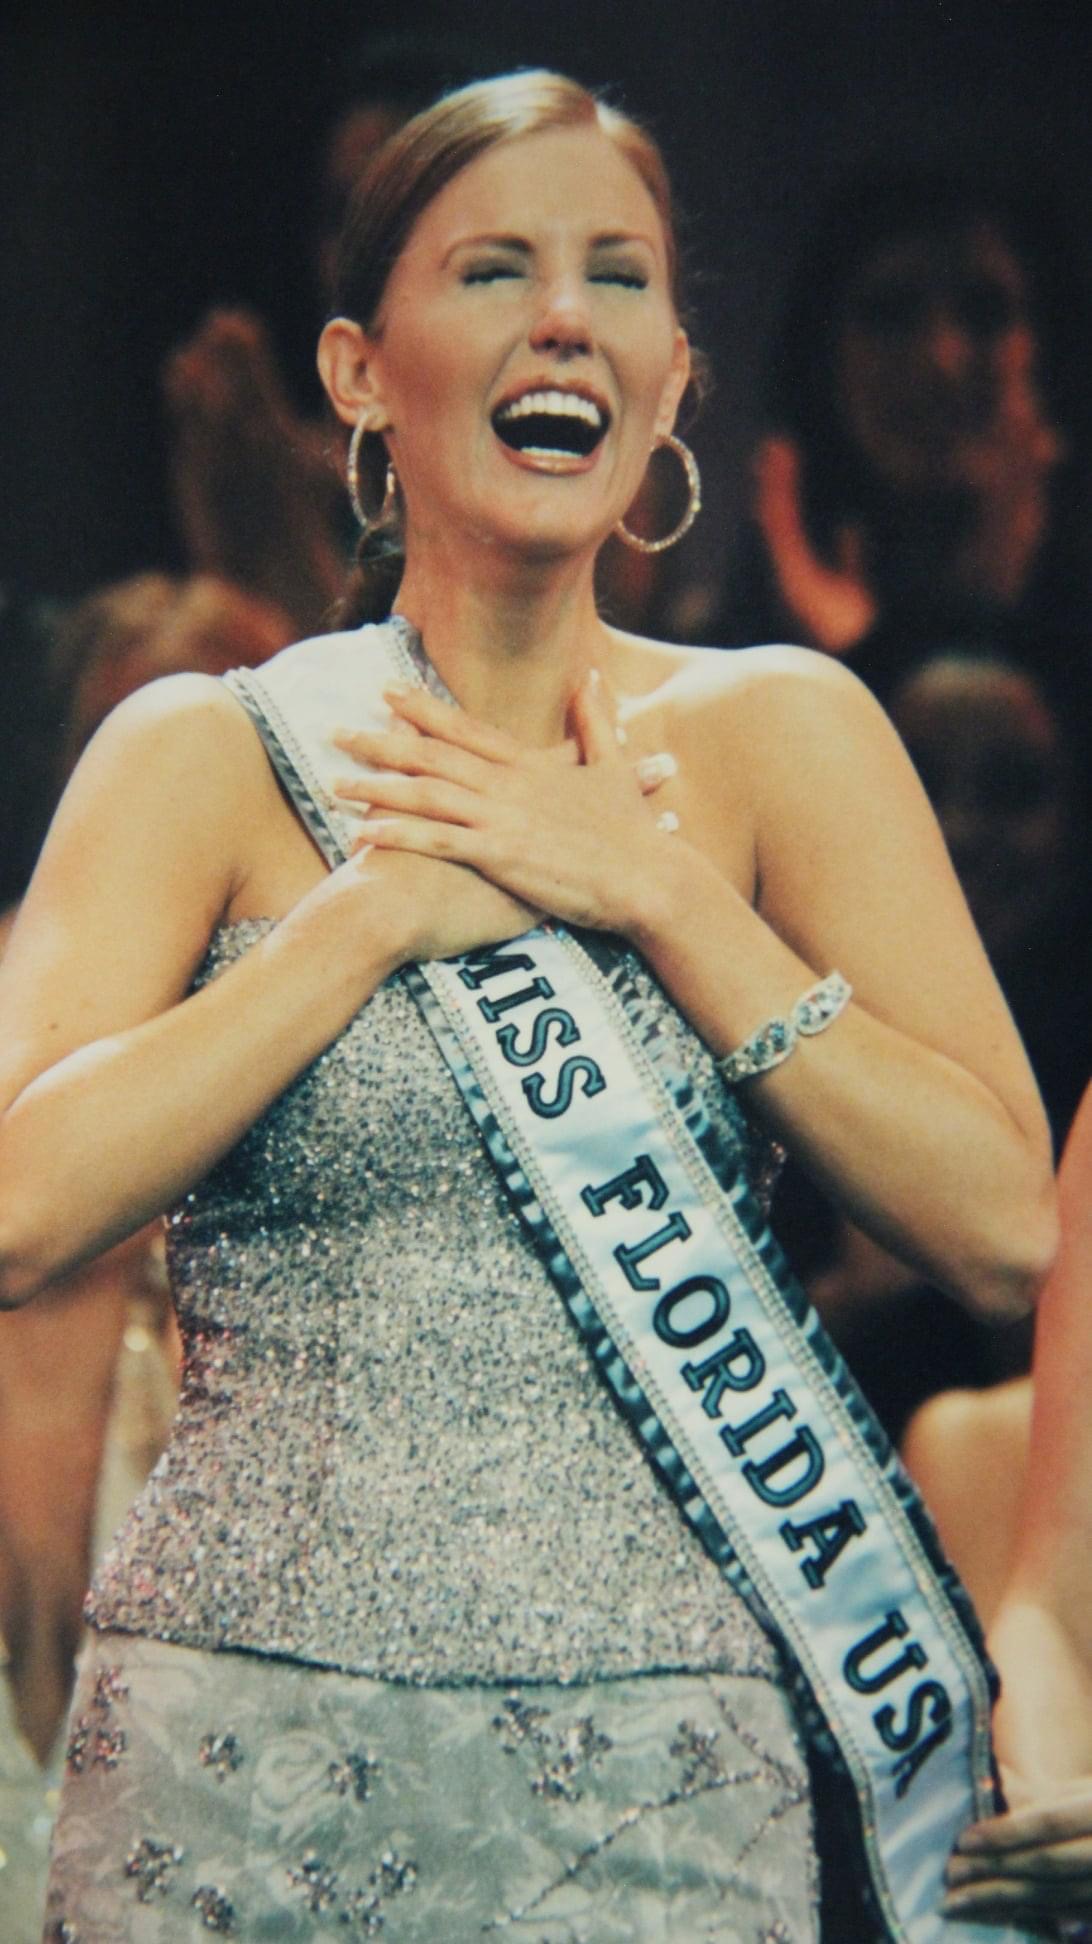 Shannon Ford is crowned Miss Florida USA 2002